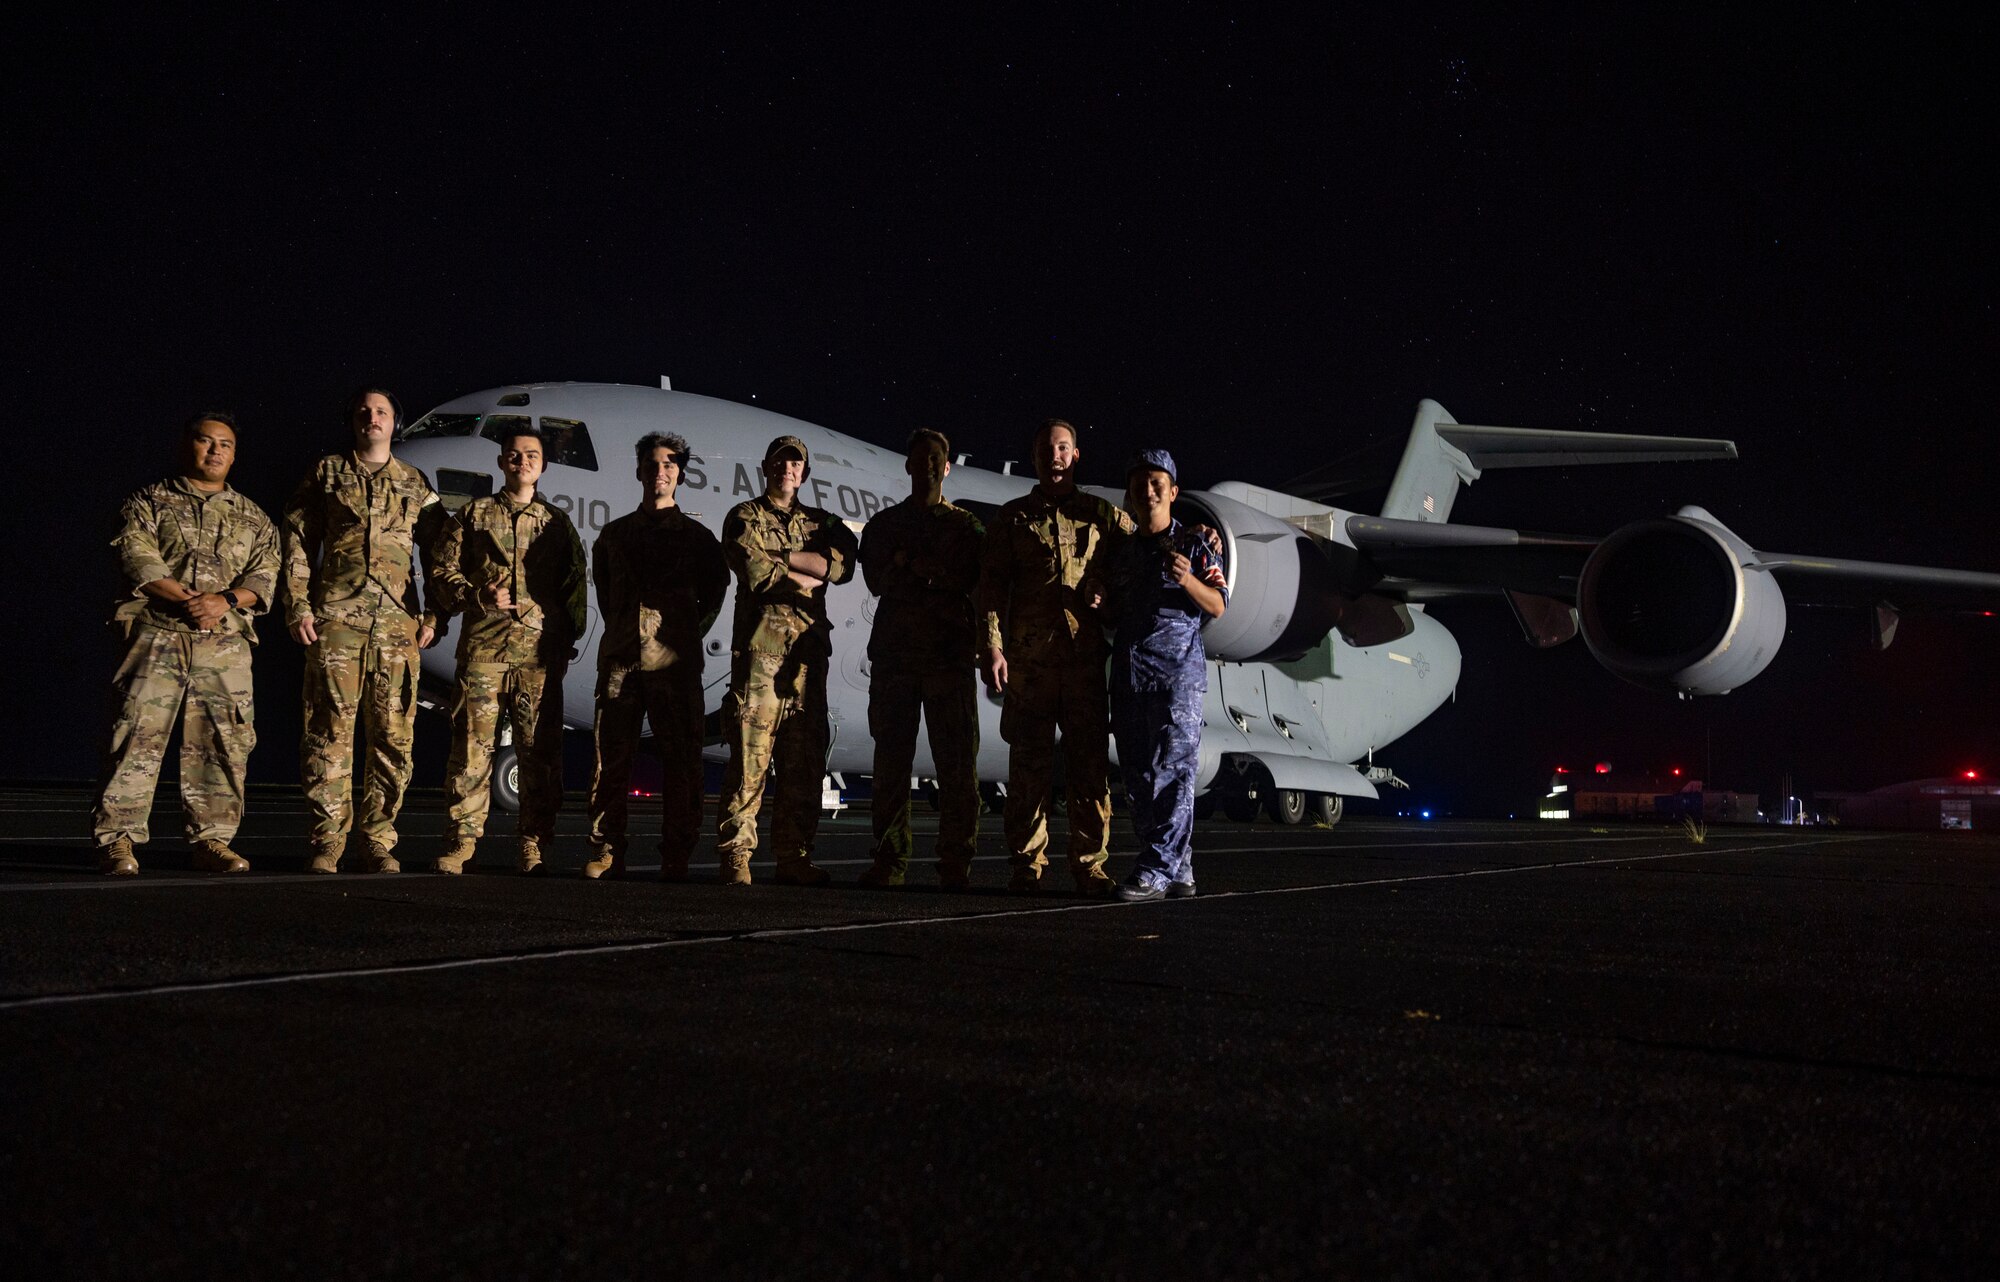 An aircrew with the 7th Airlift Squadron, Joint Base Lewis-McChord, Washington, and a member of the Japanese Self Defense Air Force, pose for a photo in front of a C-17 Globemaster III in Iwo Jima, Japan, during Exercise Rainier War 21B, Nov. 7, 2021. Rainier War 21B exercises and evaluates the 62nd Airlift Wing’s ability to employ the force and their ability to perform during wartime and contingency taskings in a high-intensity, wartime contested, degraded and operationally limited environment while supporting the contingency operations against a near-peer adversary in the U.S. Indo-Pacific Command area of responsibility. (U.S. Air Force photo by Staff Sgt. Rachel Williams)